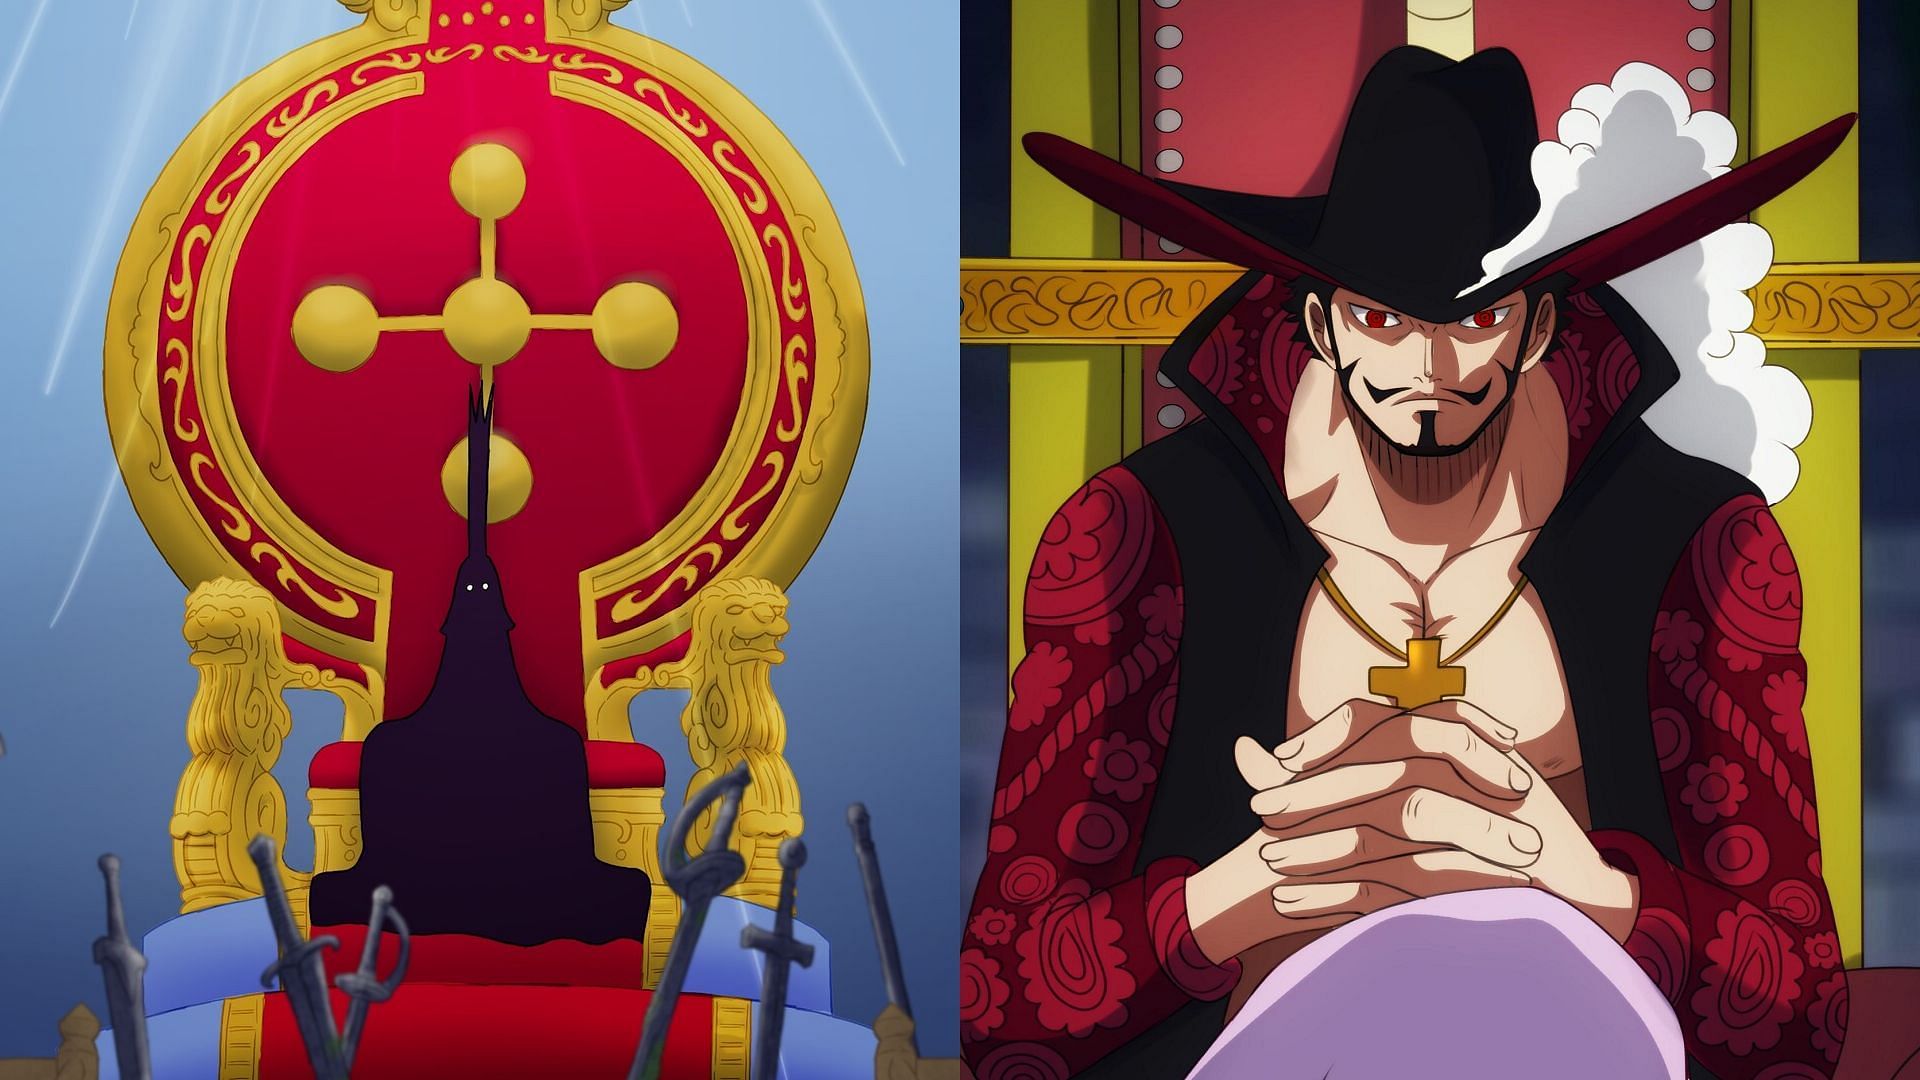 The mysterious ringed eyes may be hinting at a shocking connection between Imu-sama and Mihawk (Image via Toei Animation, One Piece)